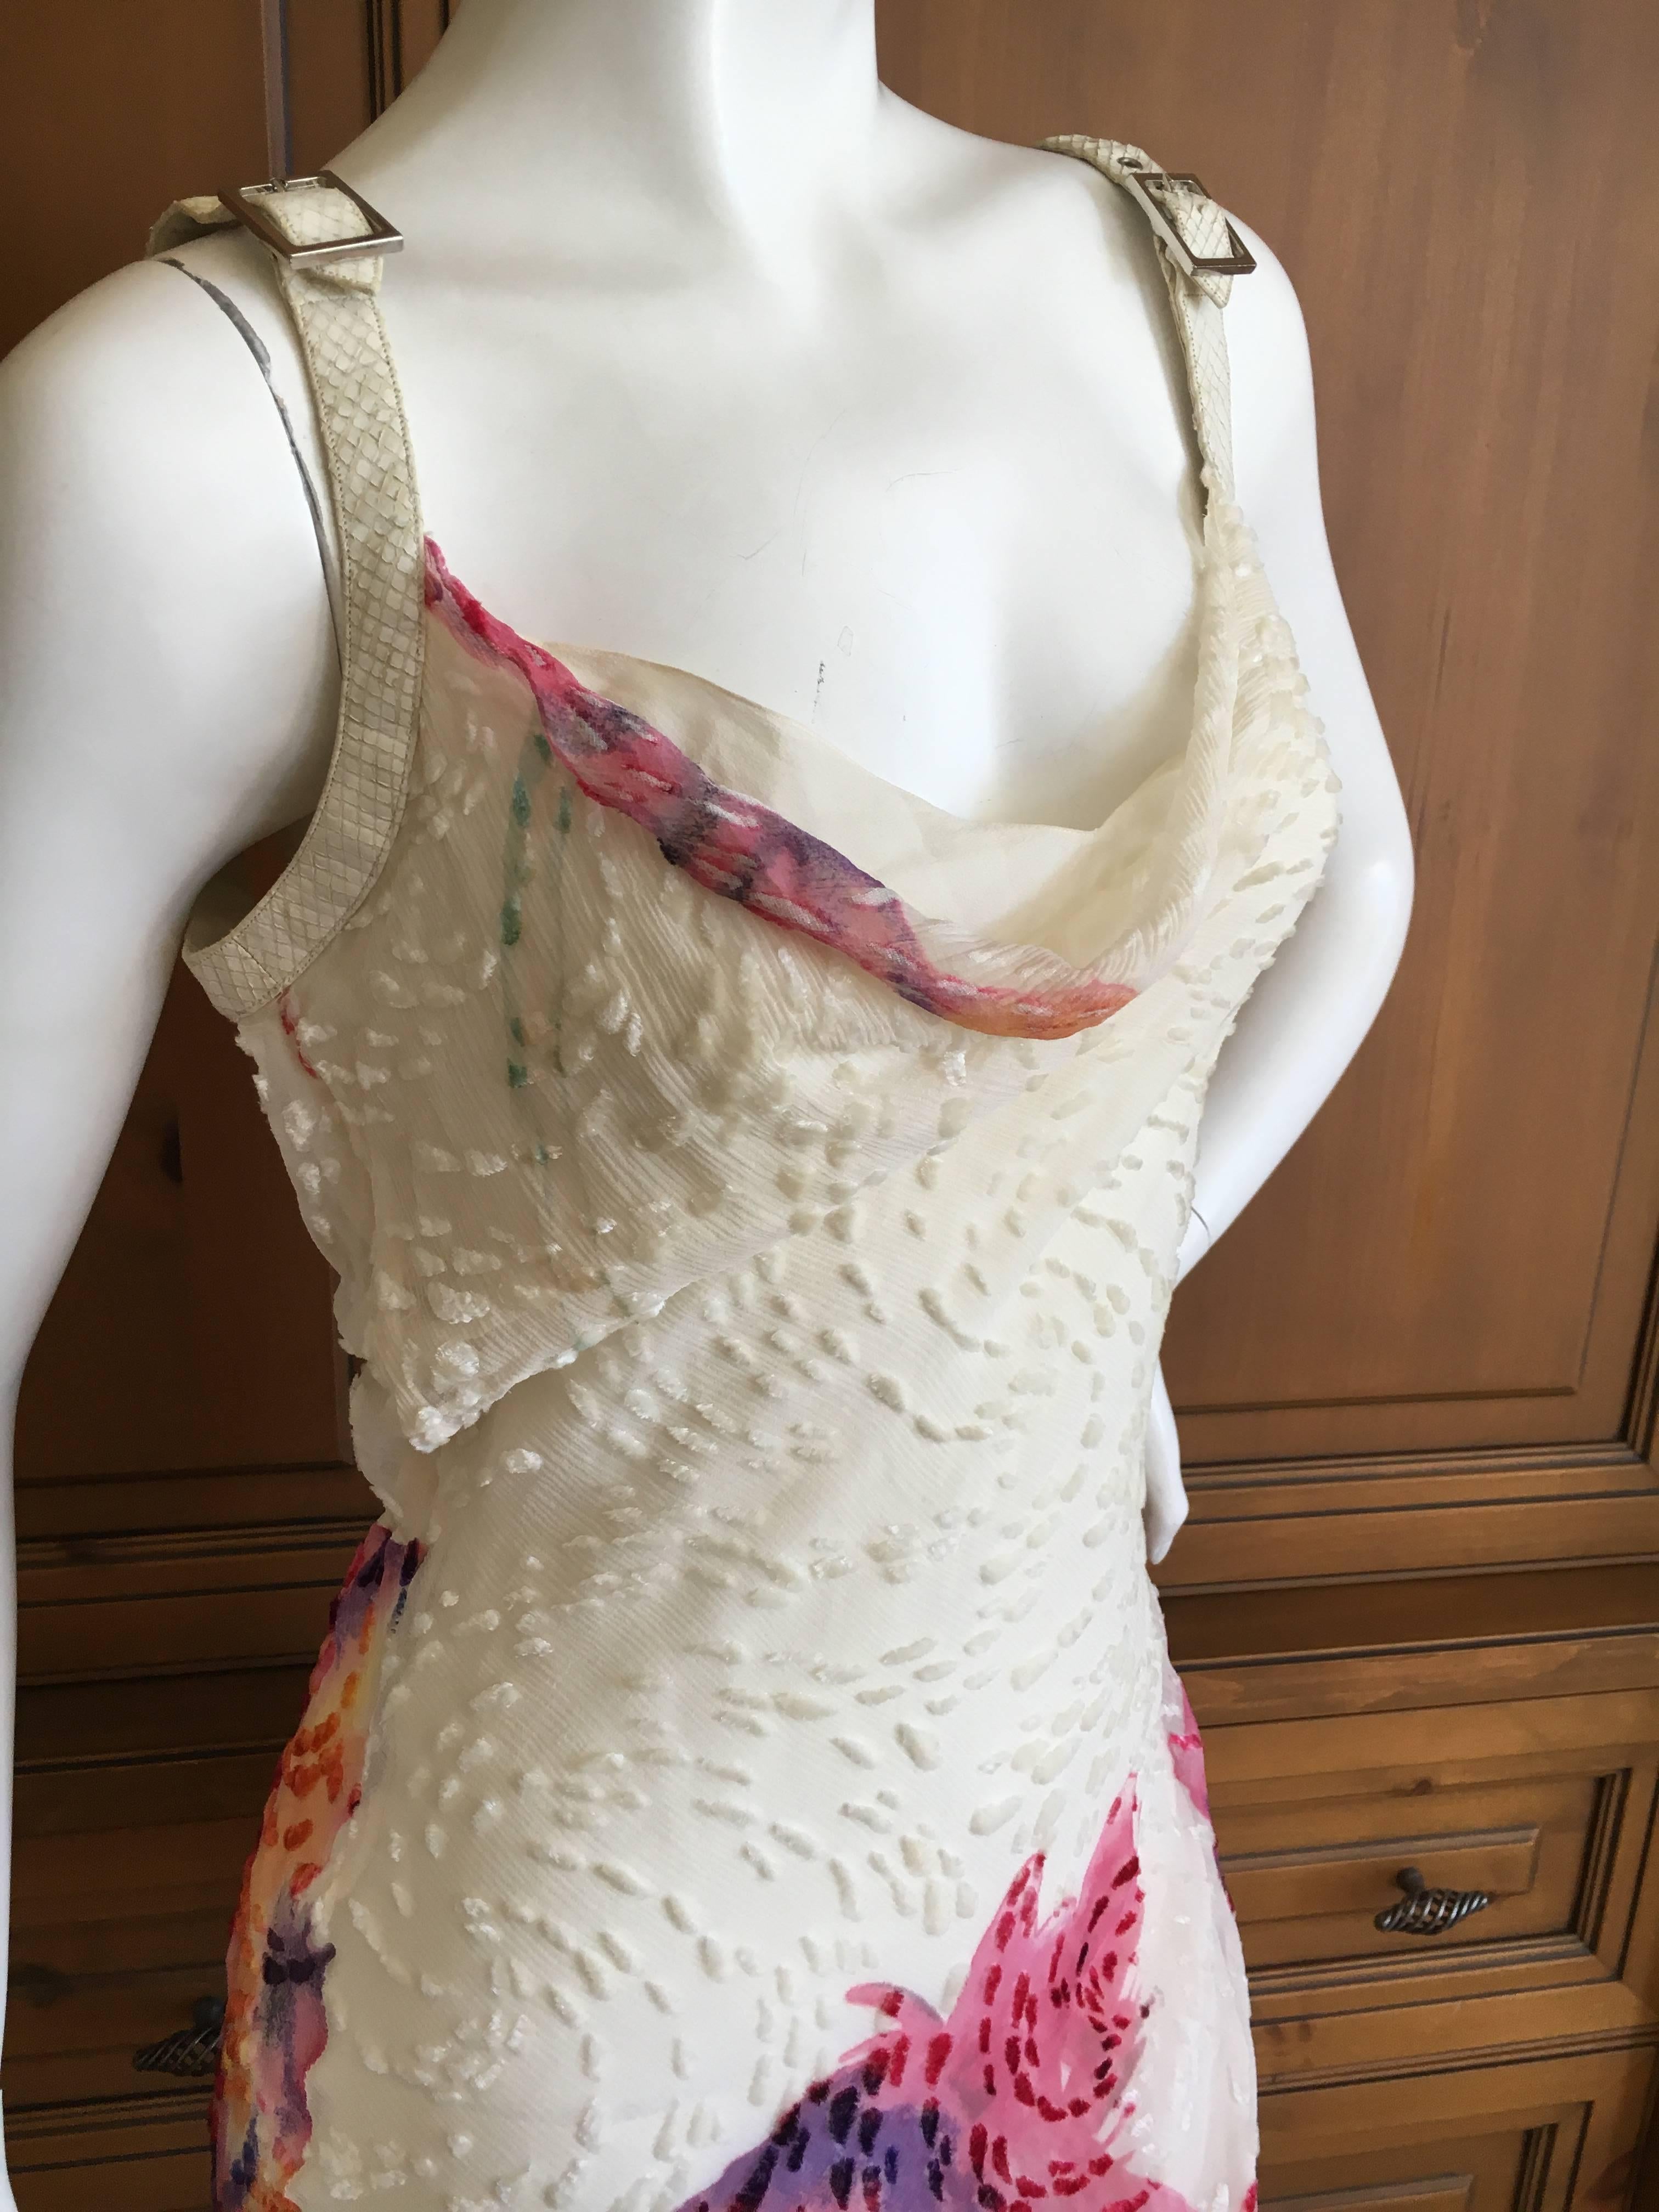 Christian Dior Bias Cut Ivory Devore Velvet Dress with Snakeskin Straps.
The fabric is a beautiful devore vevet with a colorful abstract floral pattern splashed across the bottom.
The straps are natural snakeskin lined with leather, which are